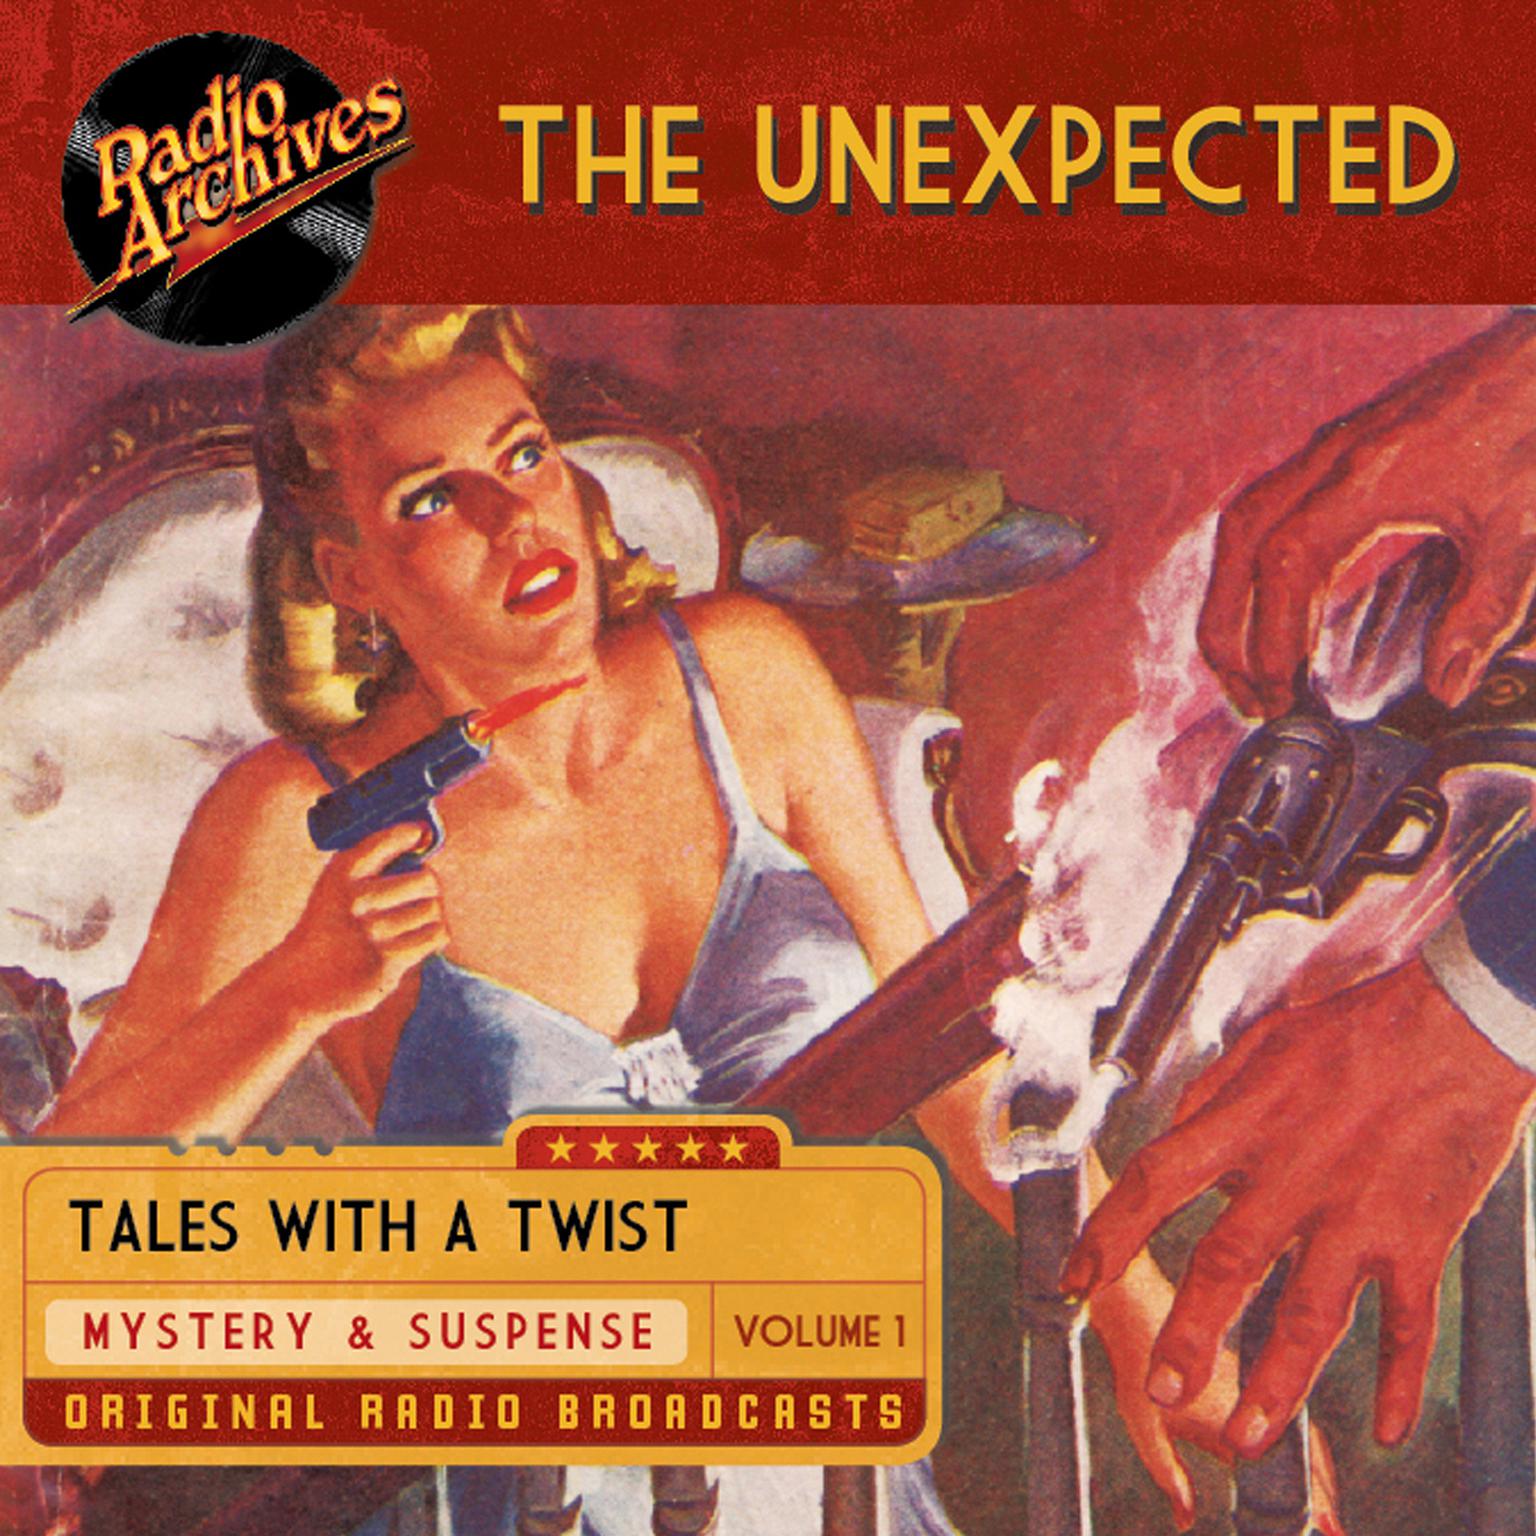 The Unexpected, Volume 1 Audiobook, by various authors